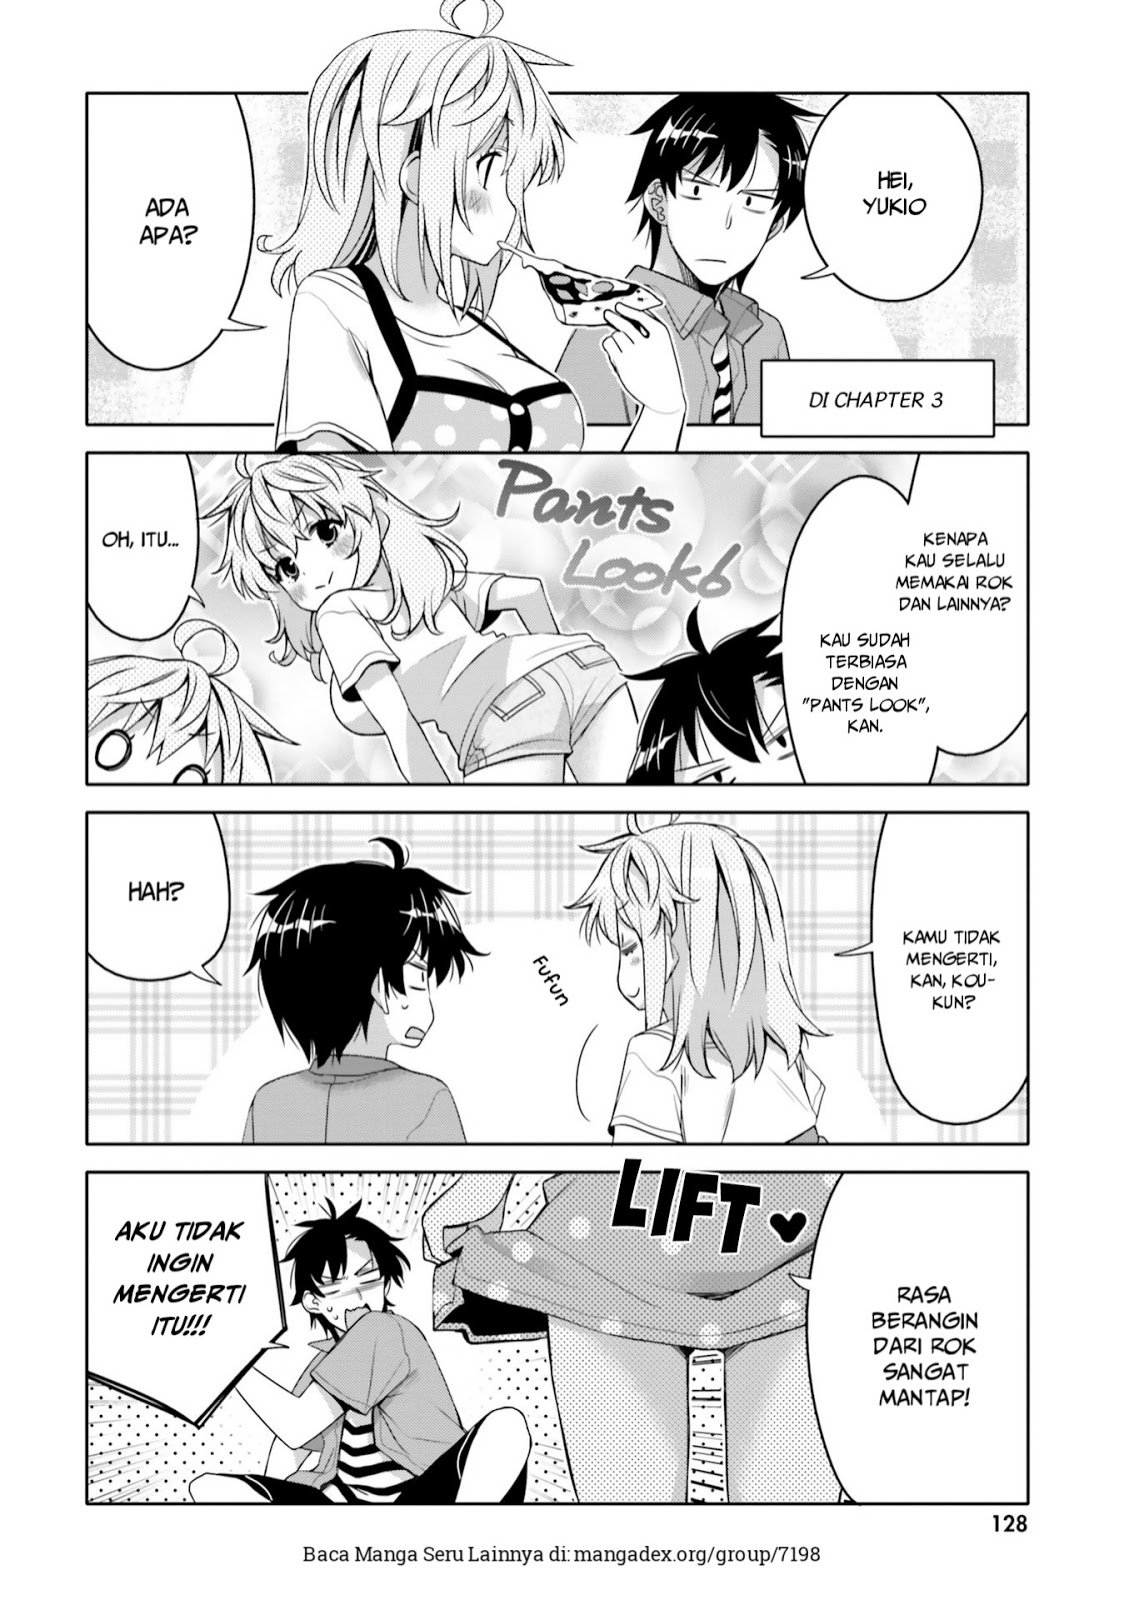 I am Worried that my Childhood Friend is too Cute! Chapter 06.5